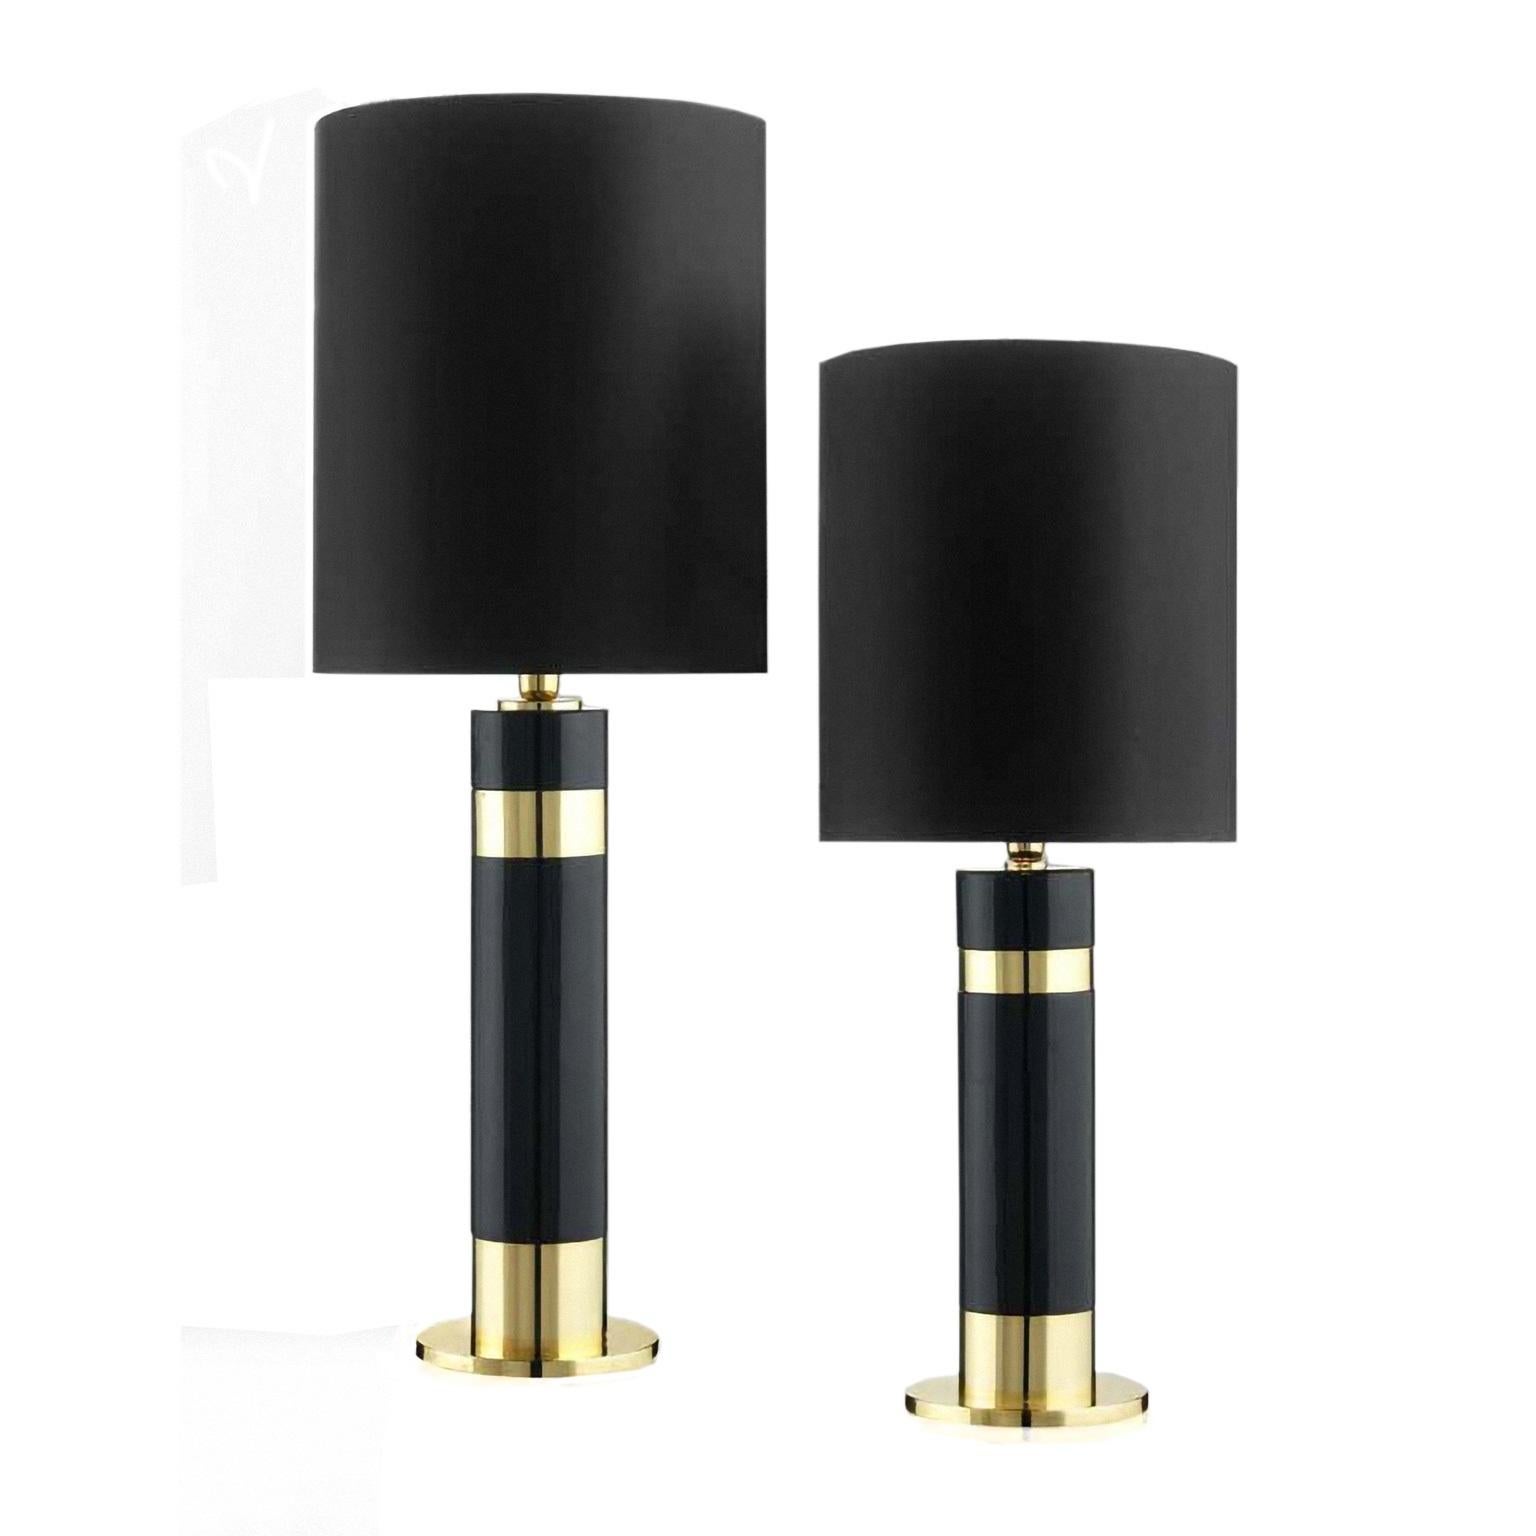 Hand-Crafted Hermes 1, Ceramic Lamp Black Glazed and Handcrafted in 24-Karat Gold For Sale